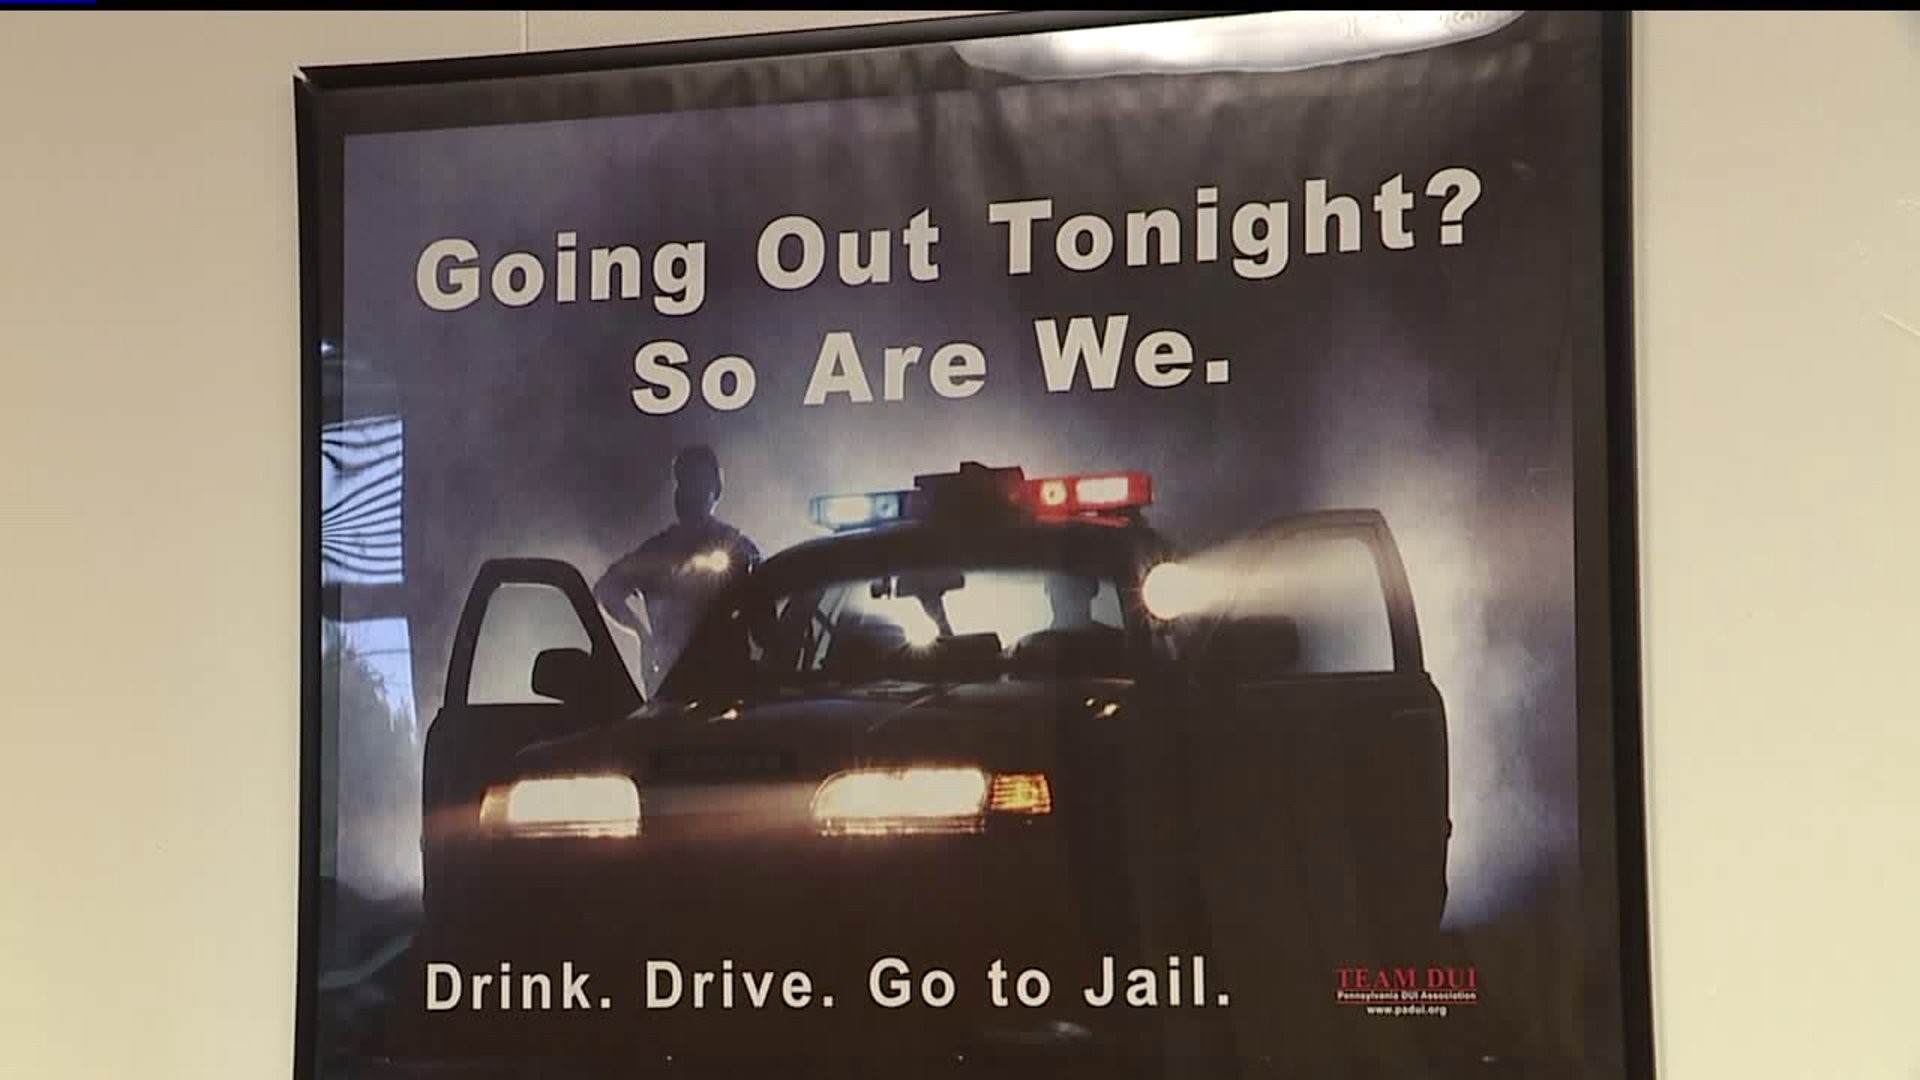 Center for Traffic Safety warns people about drunk driving on Halloween